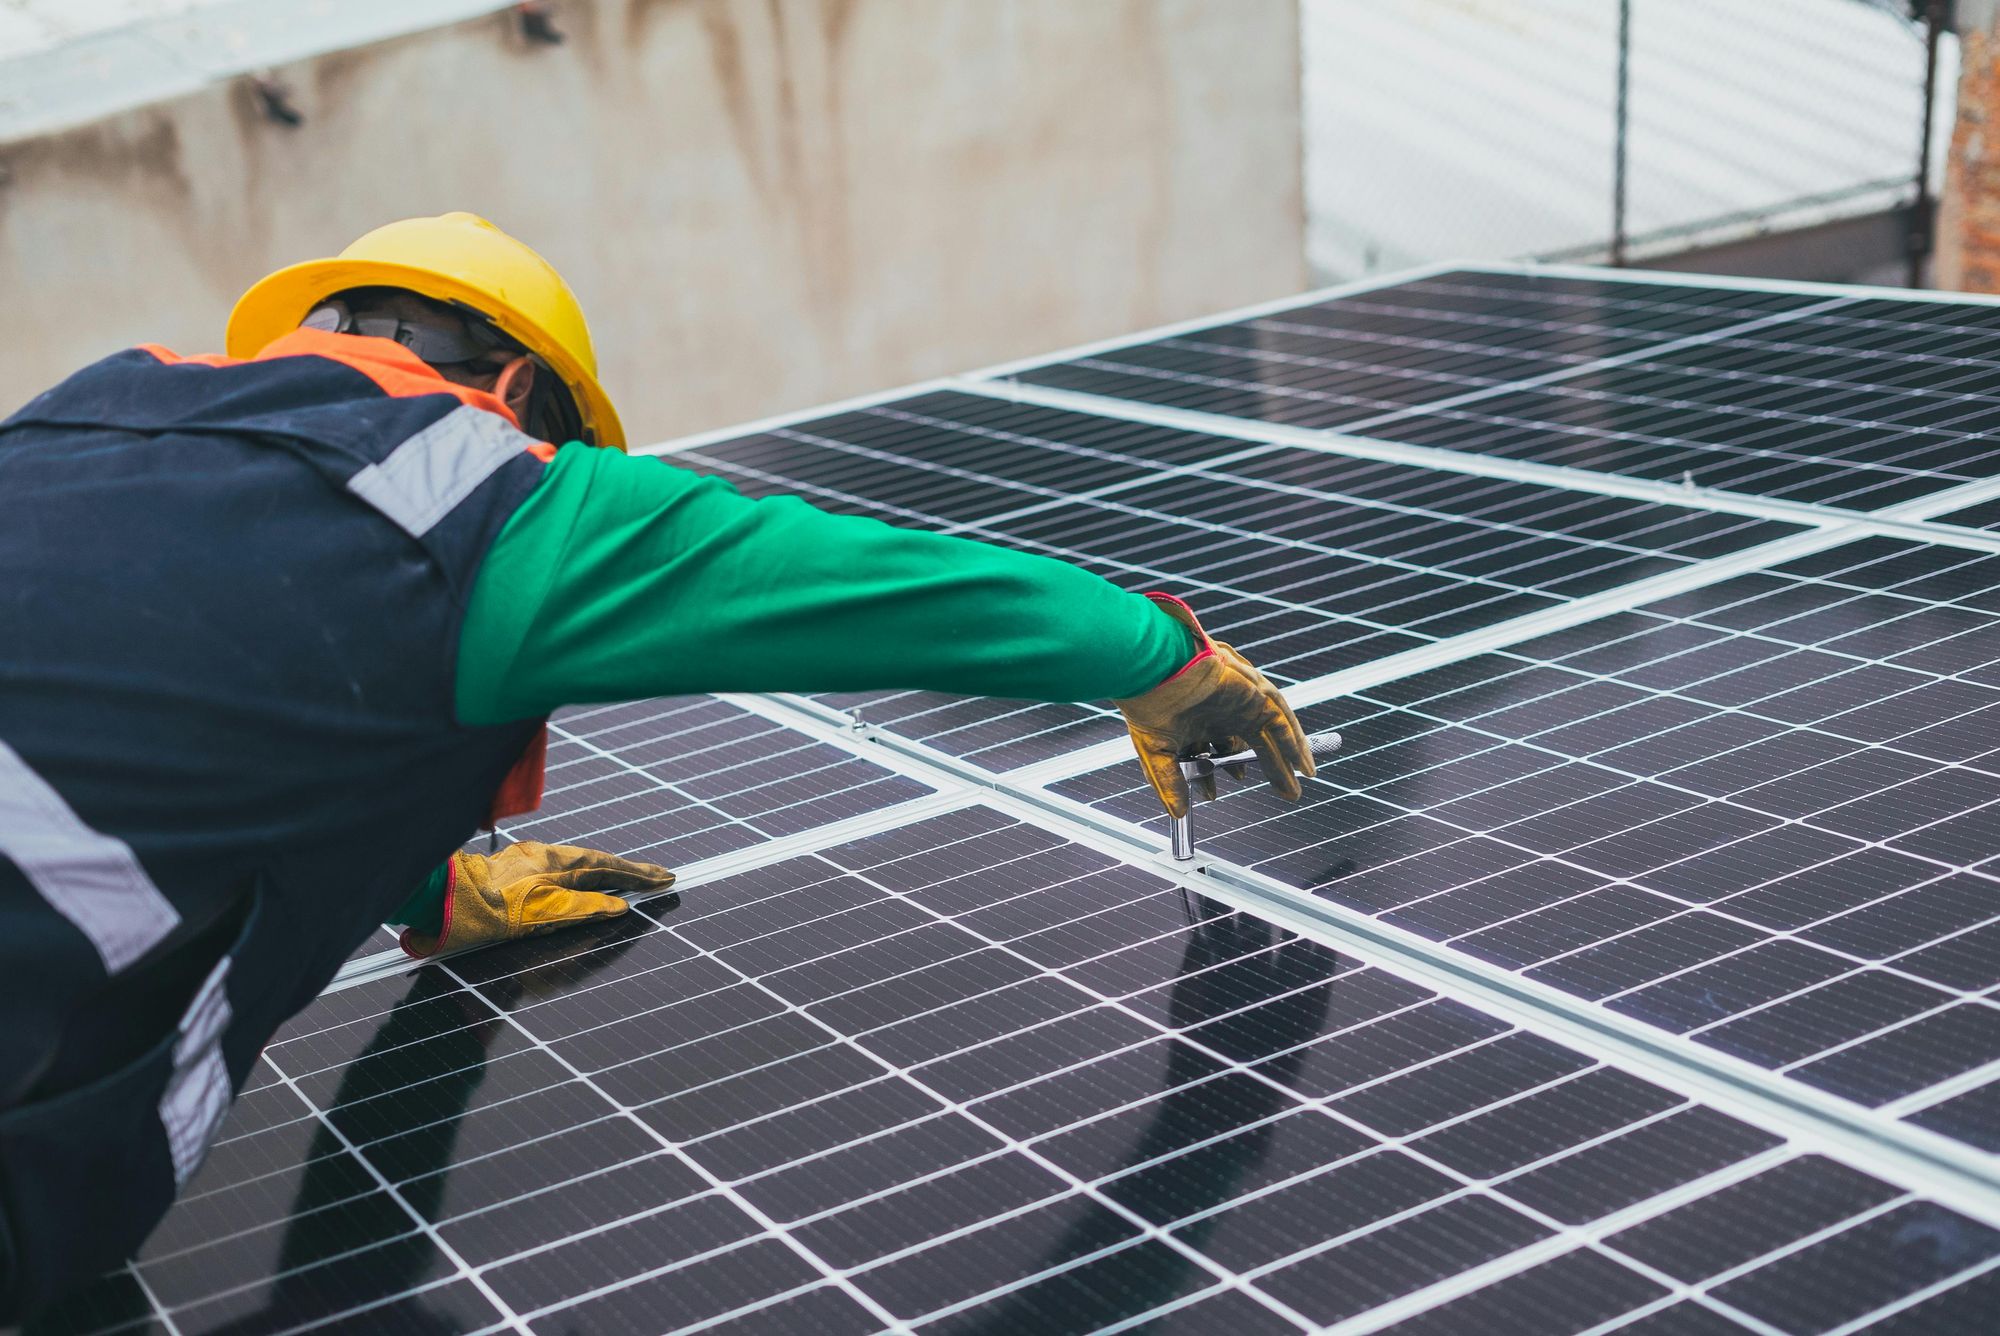 SimpleDirect's Approach to Solar Tax Credit